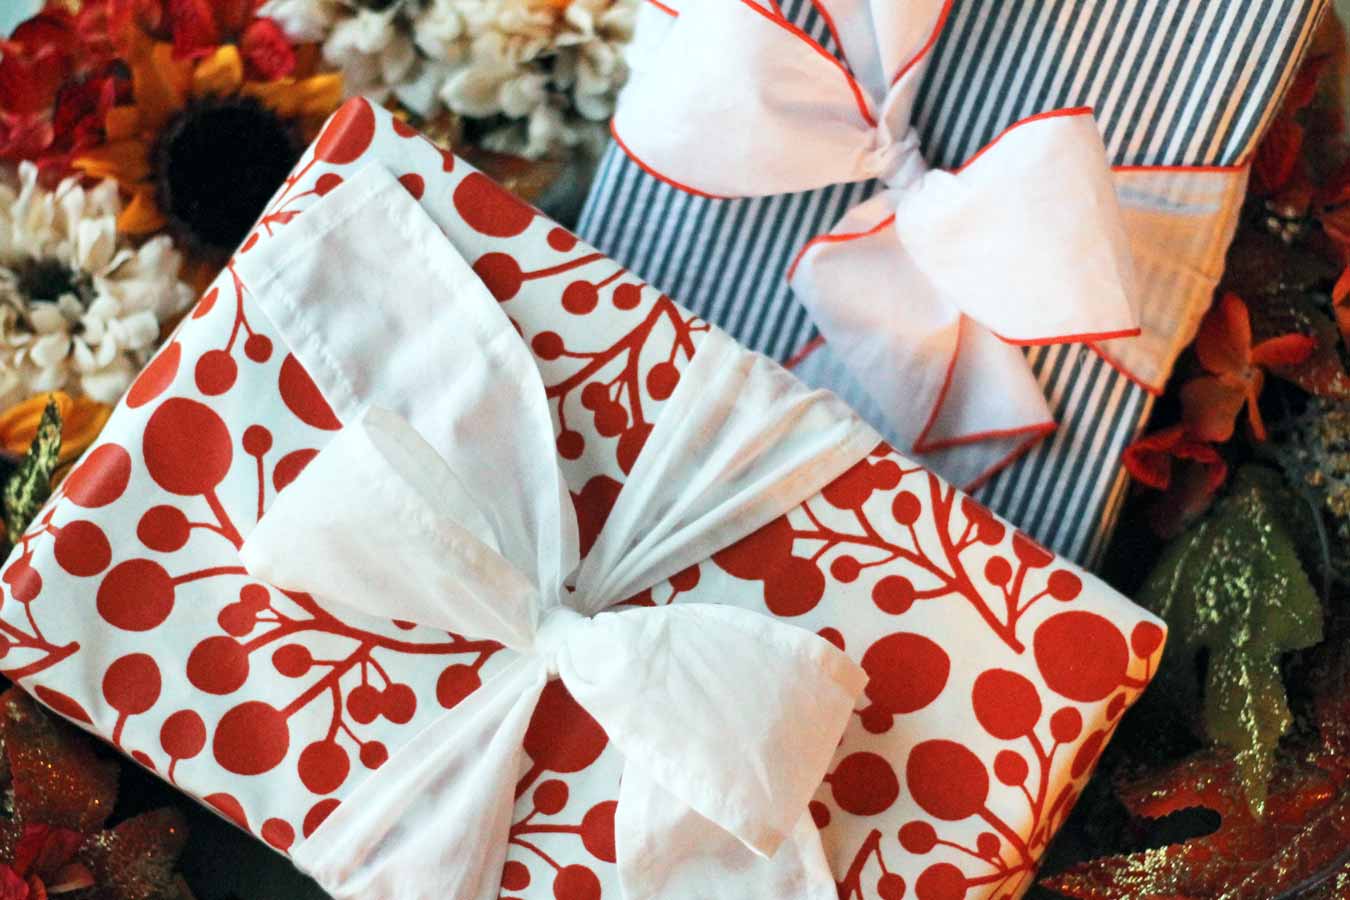 Wading In Big Shoes - Try This: Enfold Reusable Gift Wrap